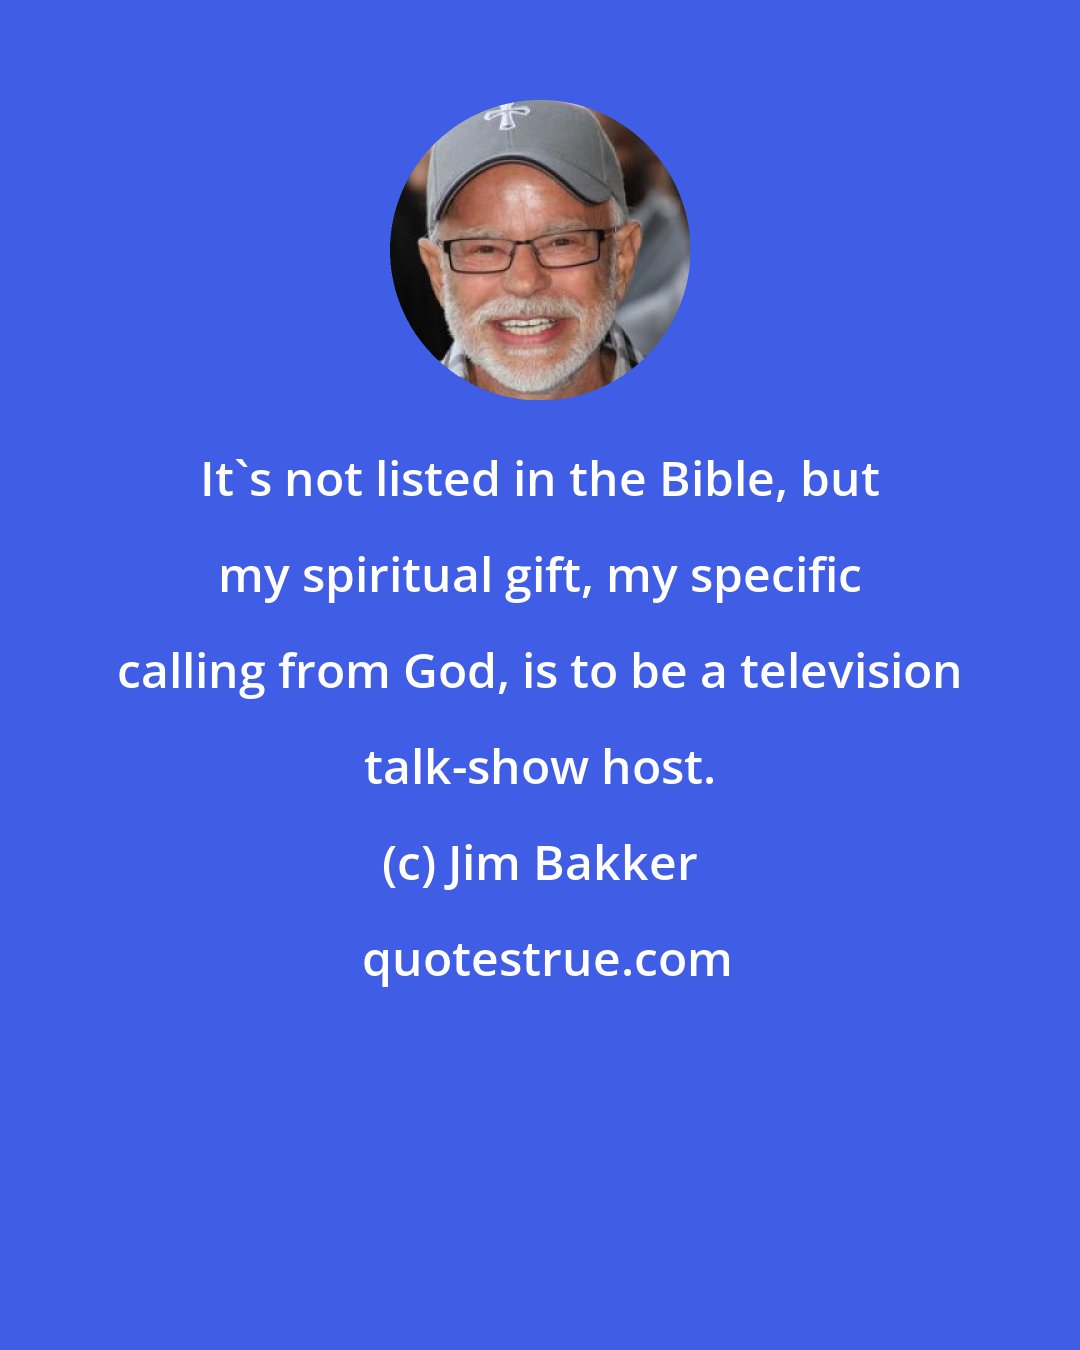 Jim Bakker: It's not listed in the Bible, but my spiritual gift, my specific calling from God, is to be a television talk-show host.